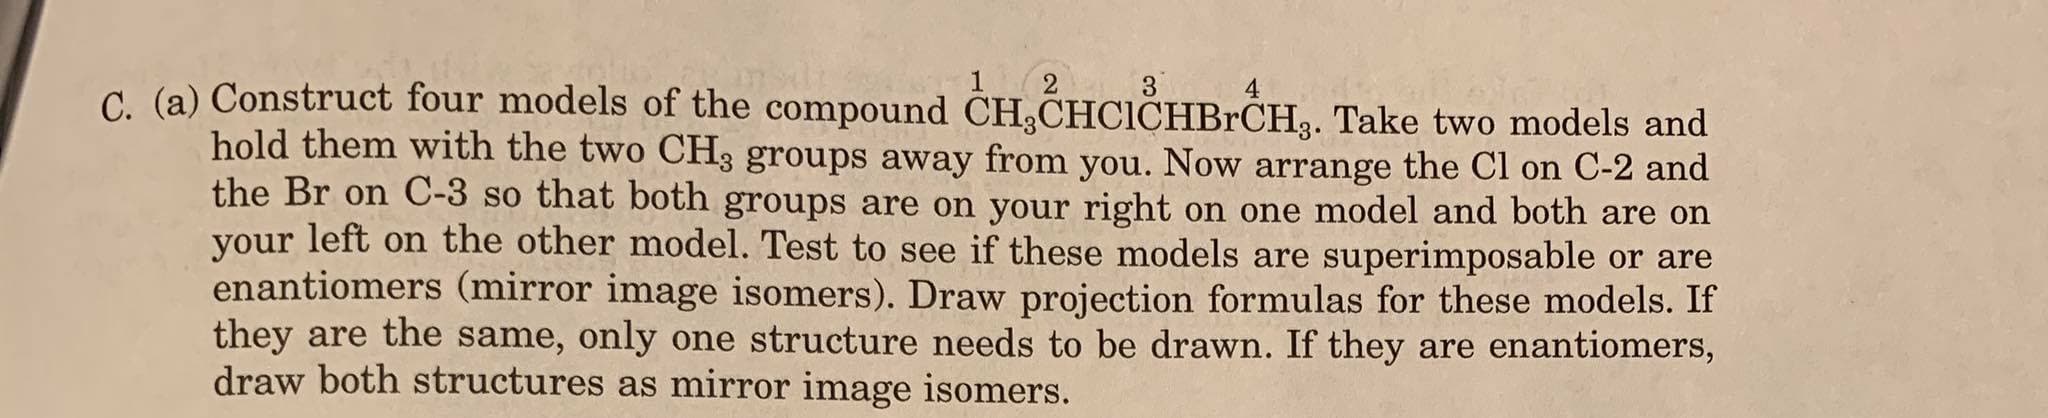 (2 3
C. (a) Construct four models of the compound CH,CHCICHBRCH3. Take two models and
hold them with the two CH3 groups away from you. Now arrange the CI on C-2 and
the Br on C-3 so that both groups are on your right on one model and both are on
your left on the other model. Test to see if these models are superimposable or are
enantiomers (mirror image isomers). Draw projection formulas for these models. If
they are the same, only one structure needs to be drawn. If they are enantiomers,
draw both structures as mirror image isomers.
